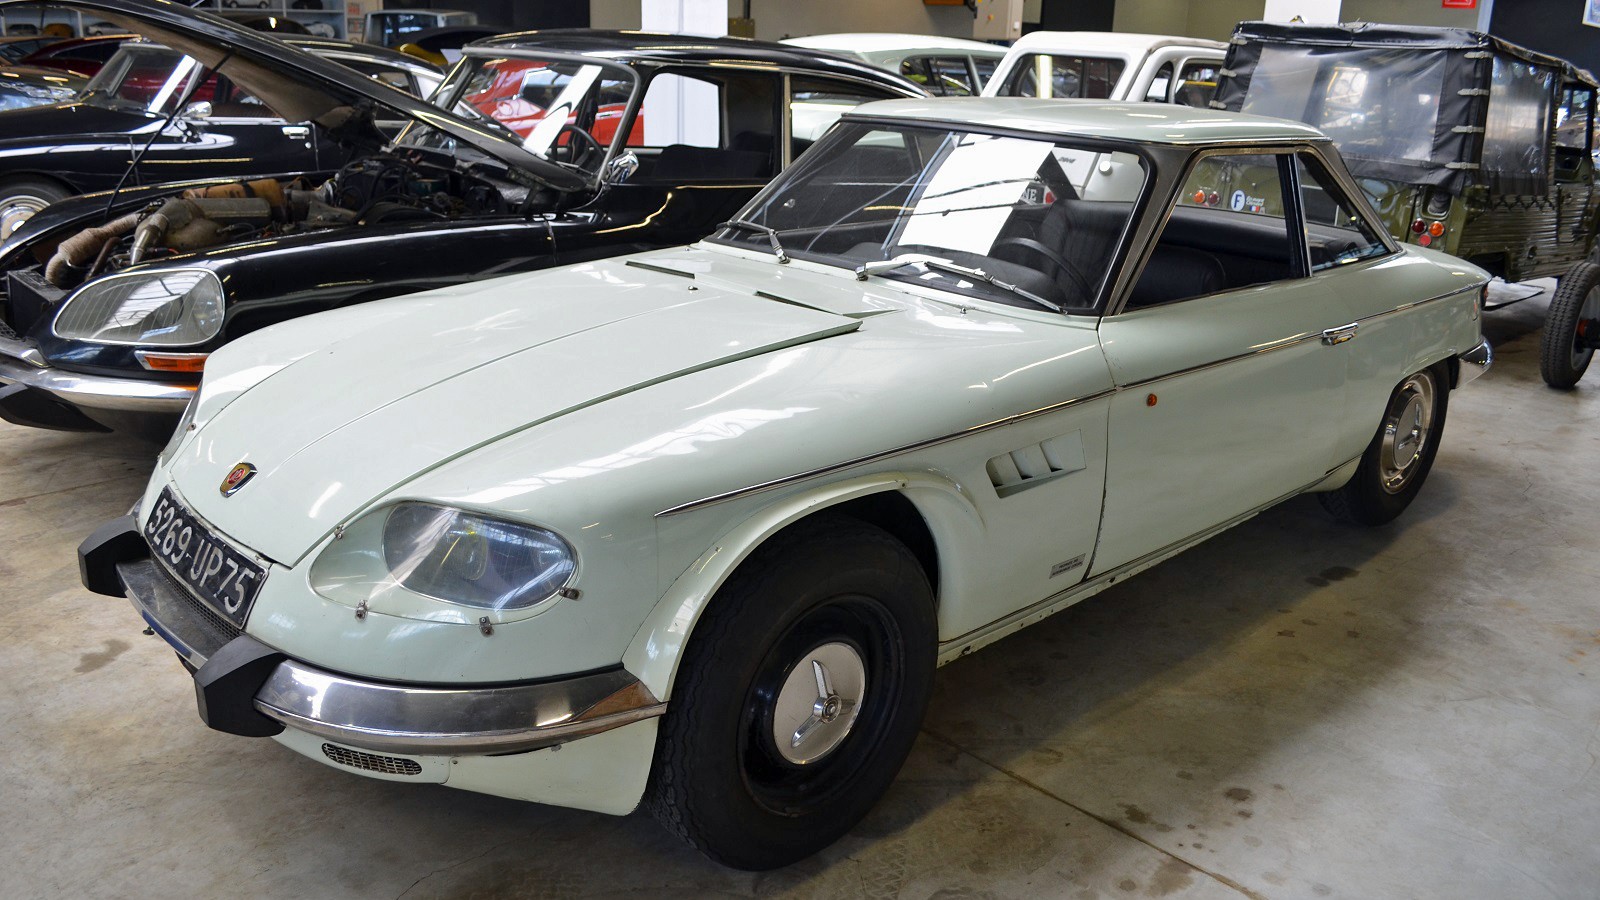 Rare car prototypes you’ve probably never seen